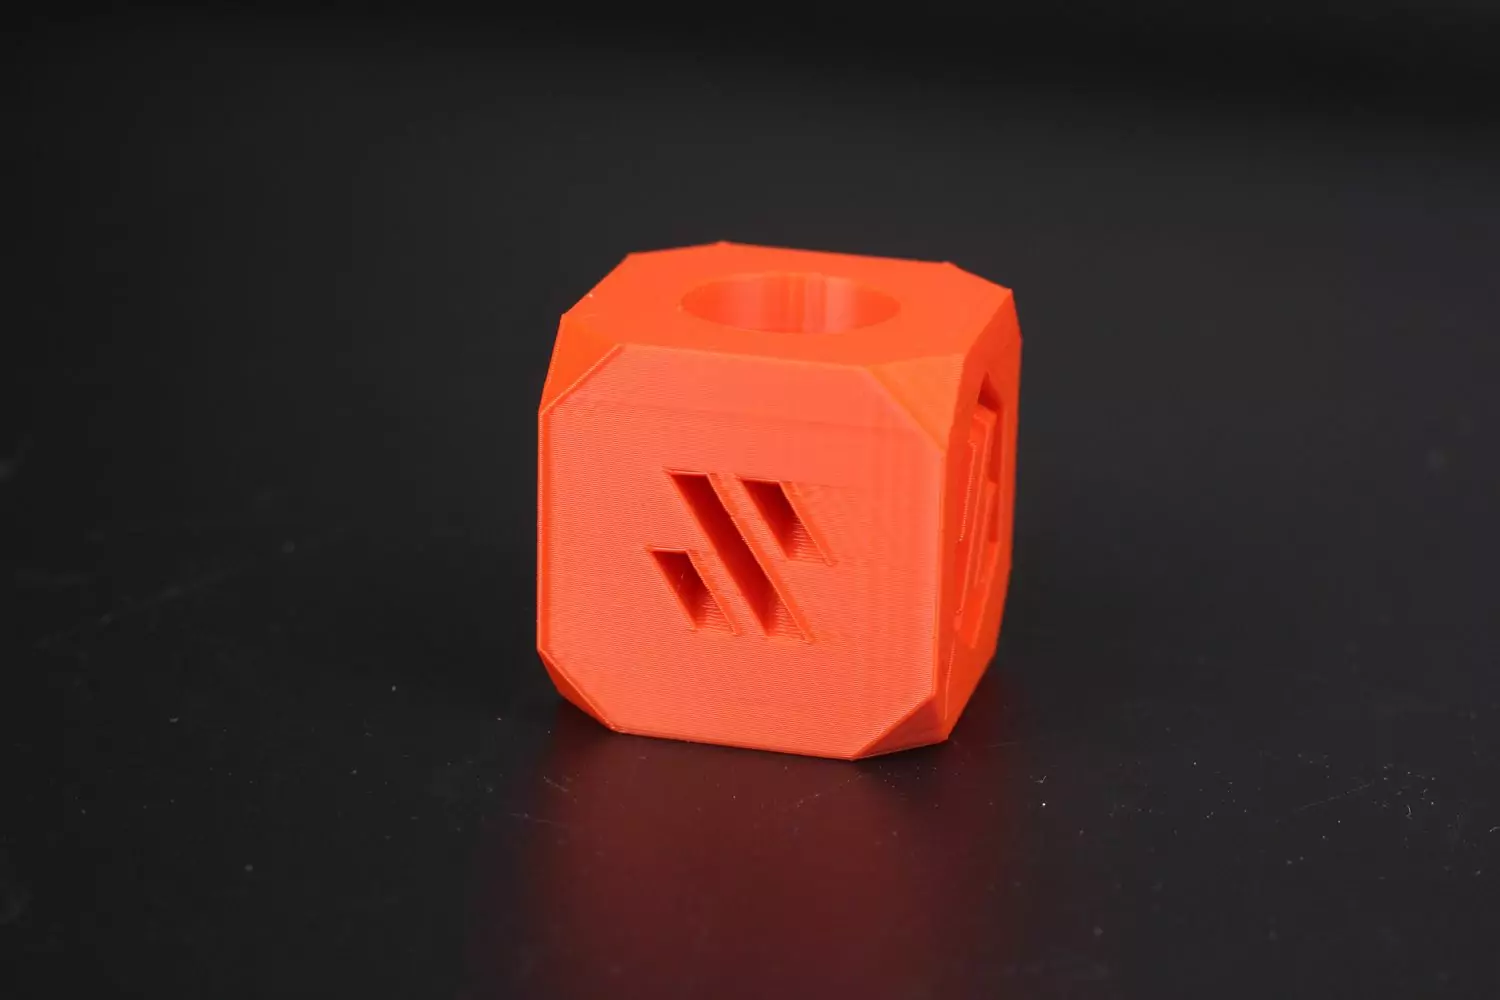 Voron Calibration Cube with Creality Sonic Pad and Klipper3 | Creality Sonic Pad Review: Klipper Firmware with Compromises